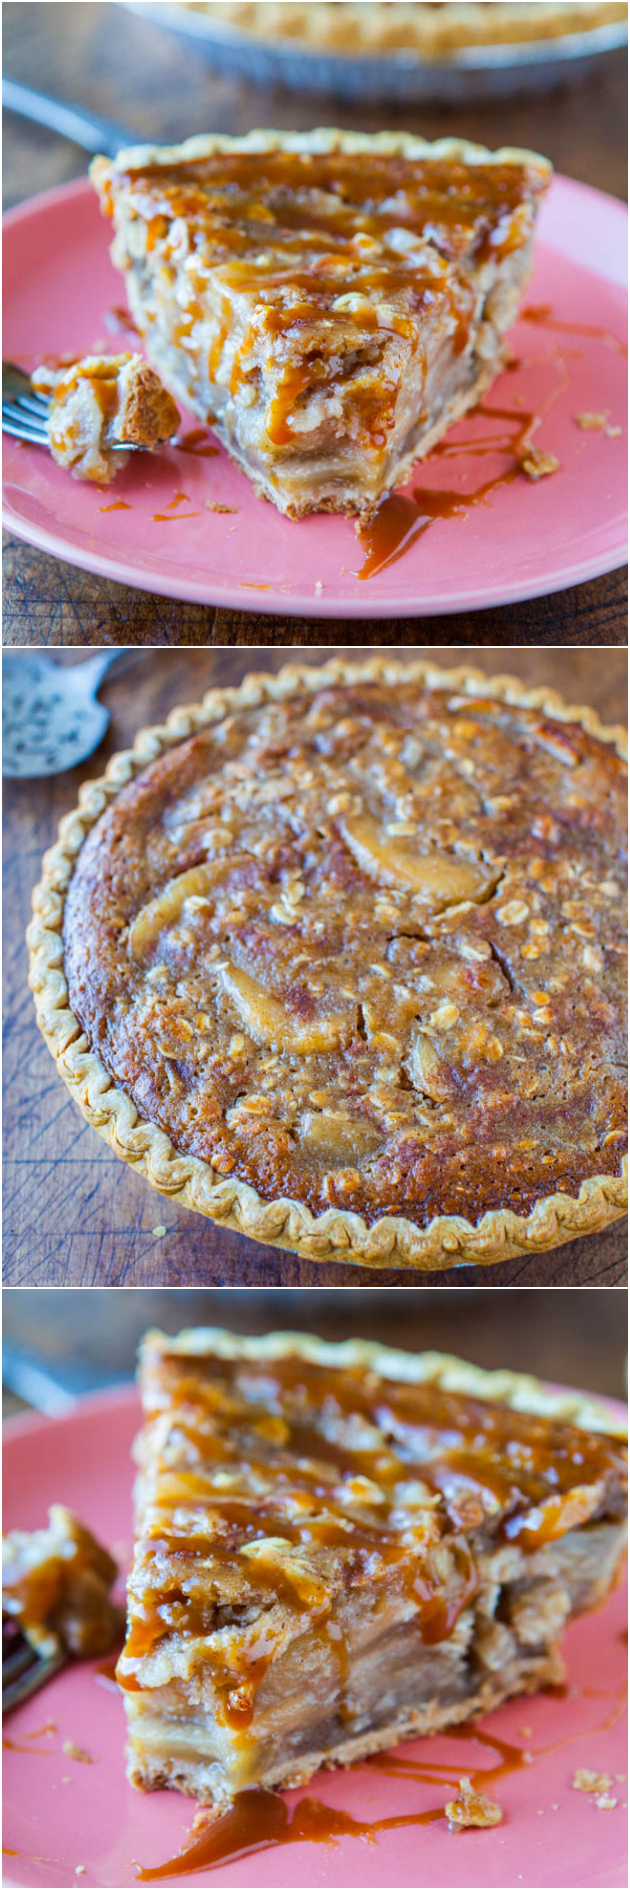 Caramel Apple Crumble Pie - Apple Pie meets Apple Crumble meets plenty of gooey caramel. Easy, fast, 5-minutes to assemble. Goofproof recipe for those of us who aren't pie-makers!